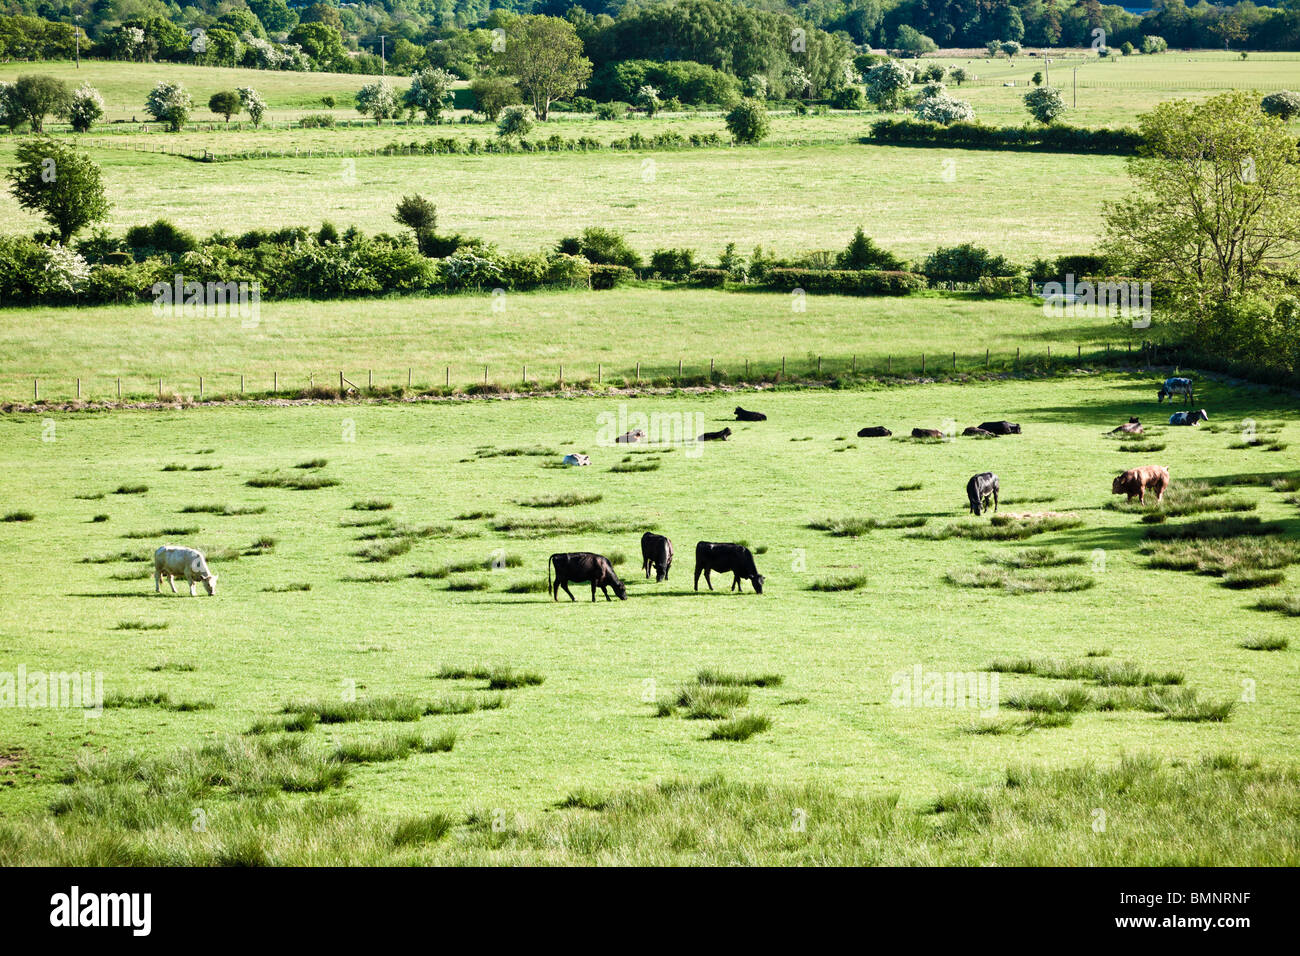 Cows and bull grazing in a field England UK Stock Photo